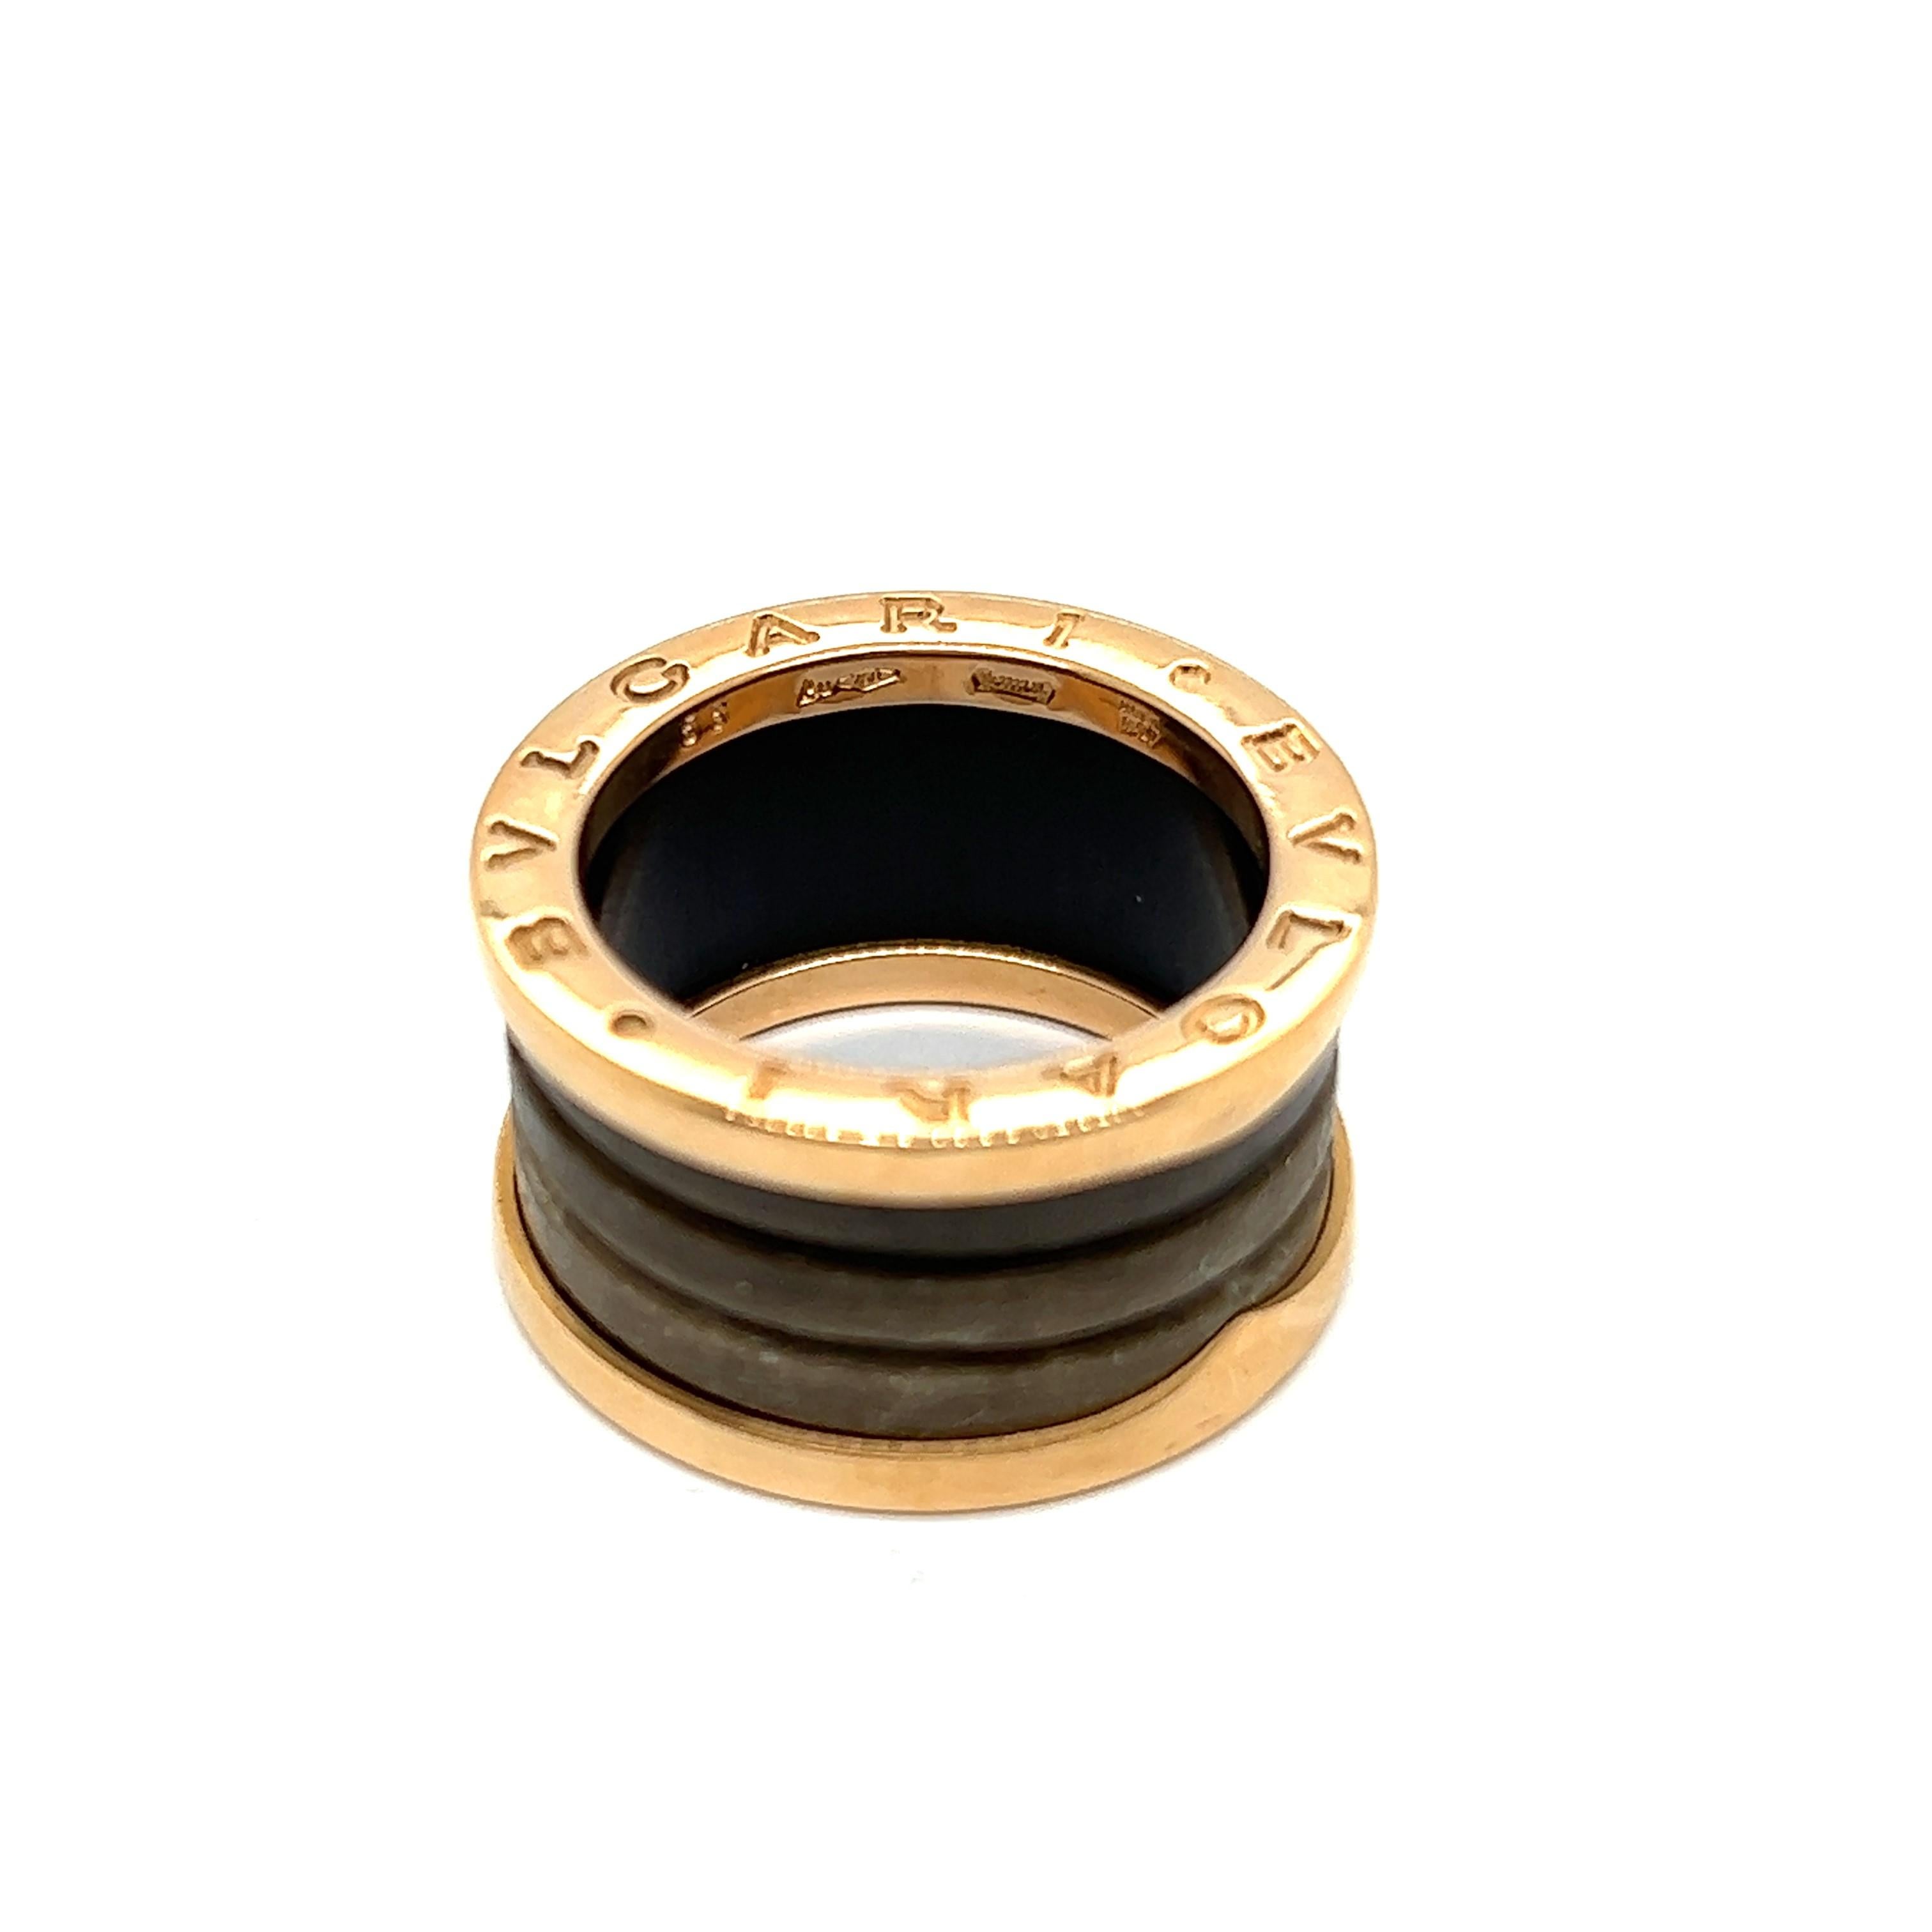 Introducing iconic Bzero1 Ring by Bvlgari – a seamless blend of grace and ingenuity. This ring is fashioned from lustrous 18 Karat rose gold with a centerpiece of agate. In some beliefs, agate is thought to strengthen bonds and foster positive